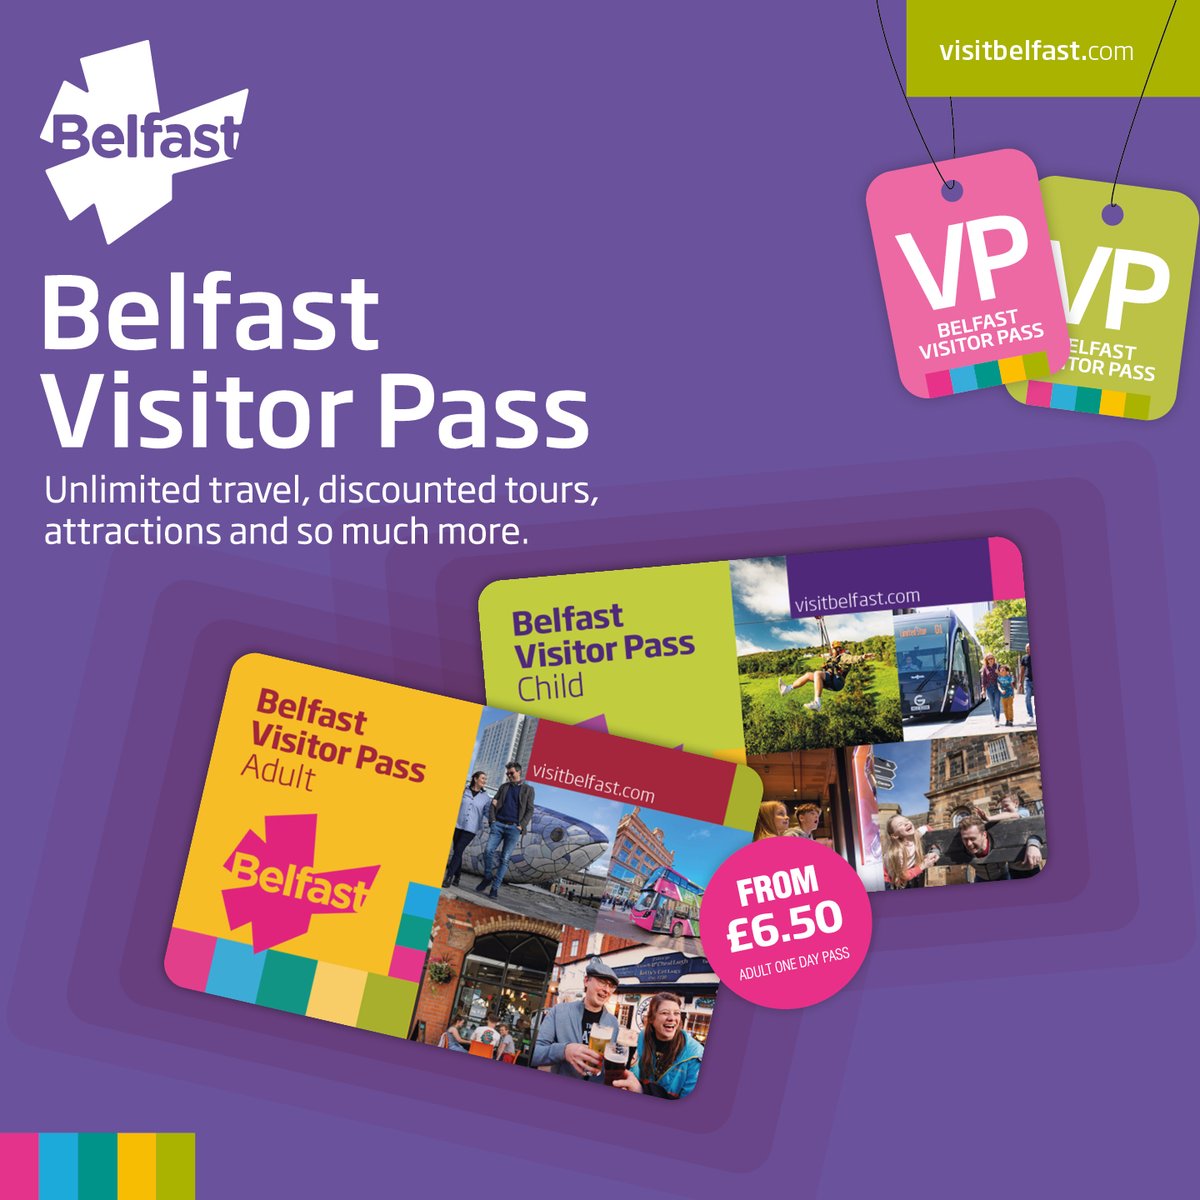 The Belfast Visitor Pass is the perfect ticket to get around Belfast & enjoy all the city has to offer. We have teamed up with @VisitBelfast to give BVP users discounted tours, attractions & more. ℹ️ Find out all about the great discounts 👉 bit.ly/49sTLwg